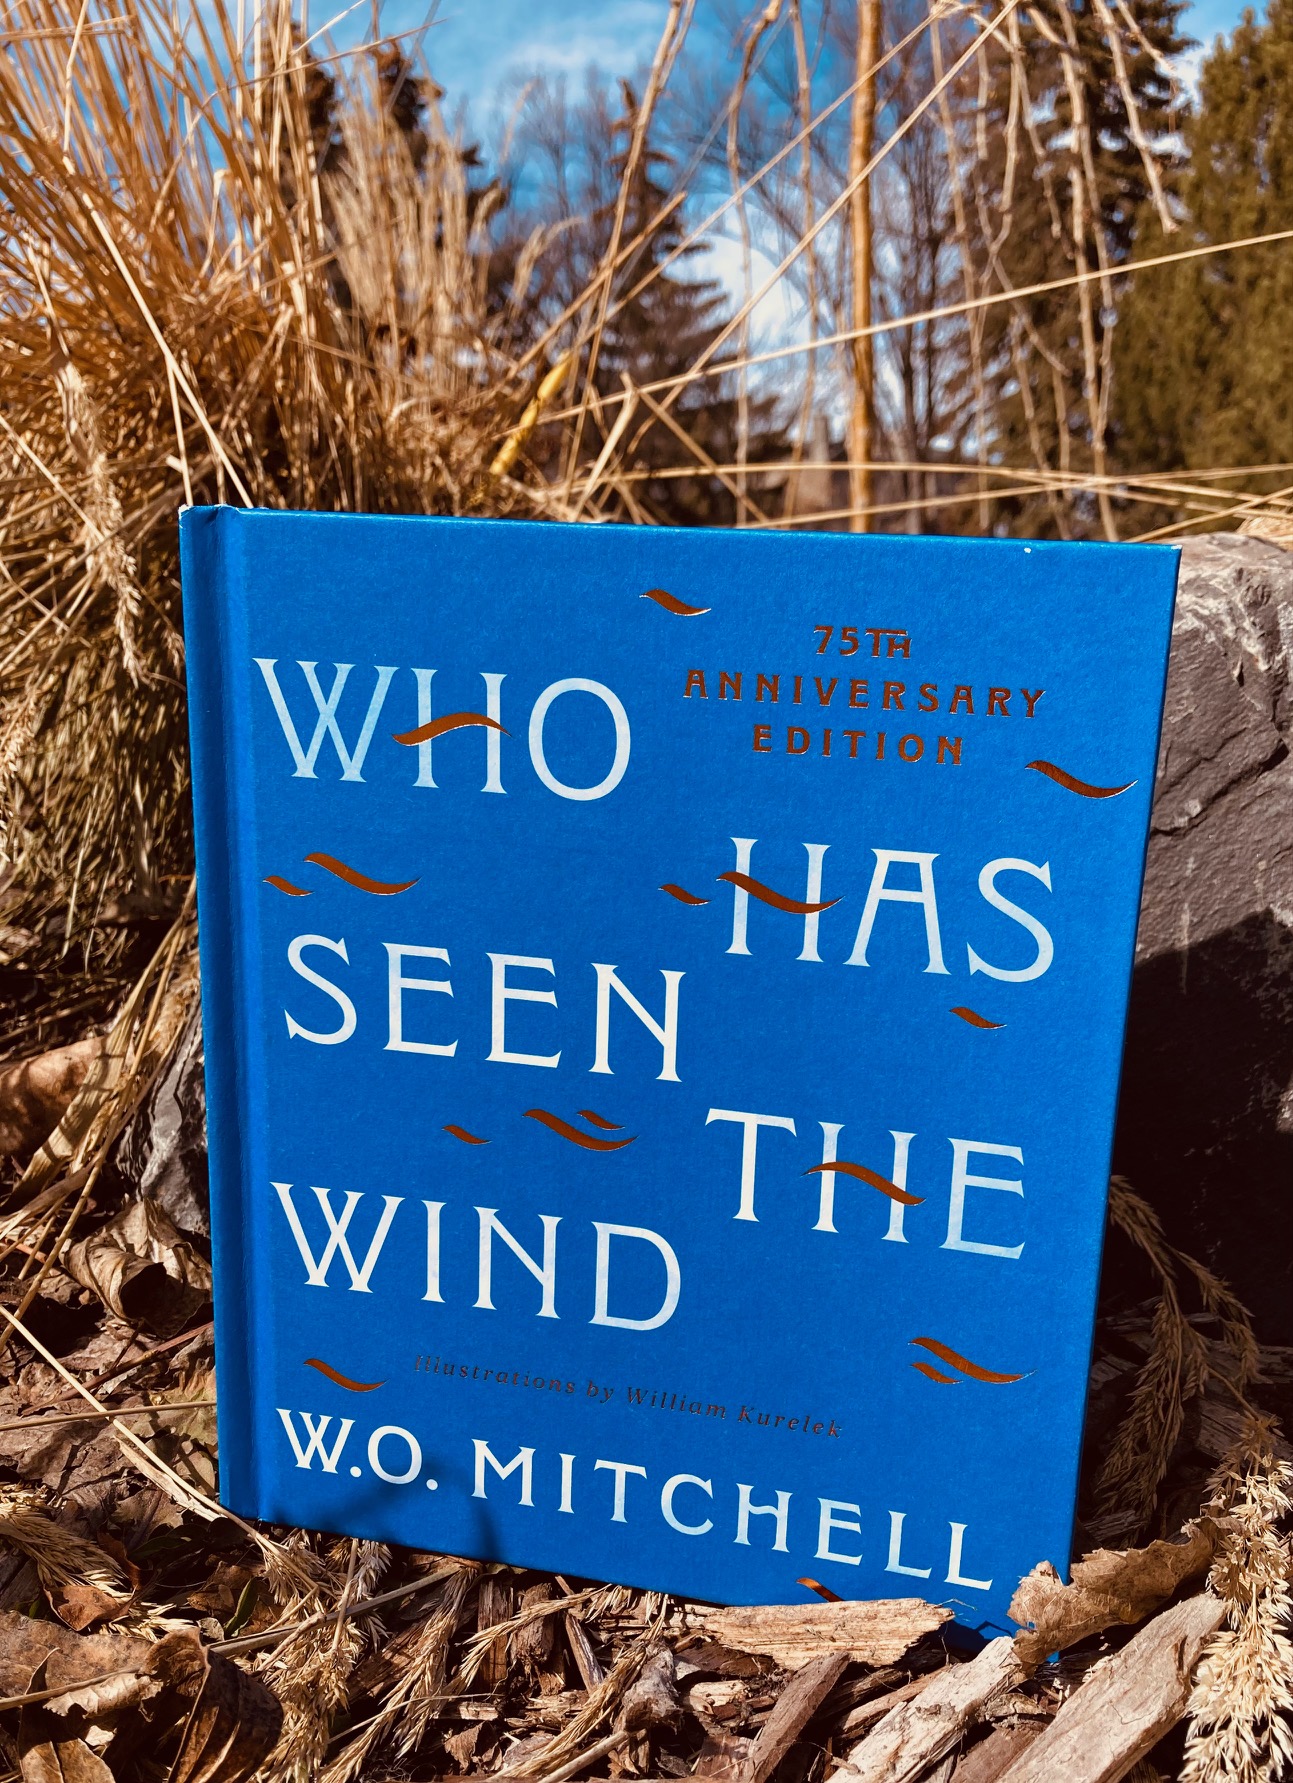 Who Has Seen the Wind by W.O. Mitchell book pictured outdoors on top of dead leaves and some dried out branches behind it